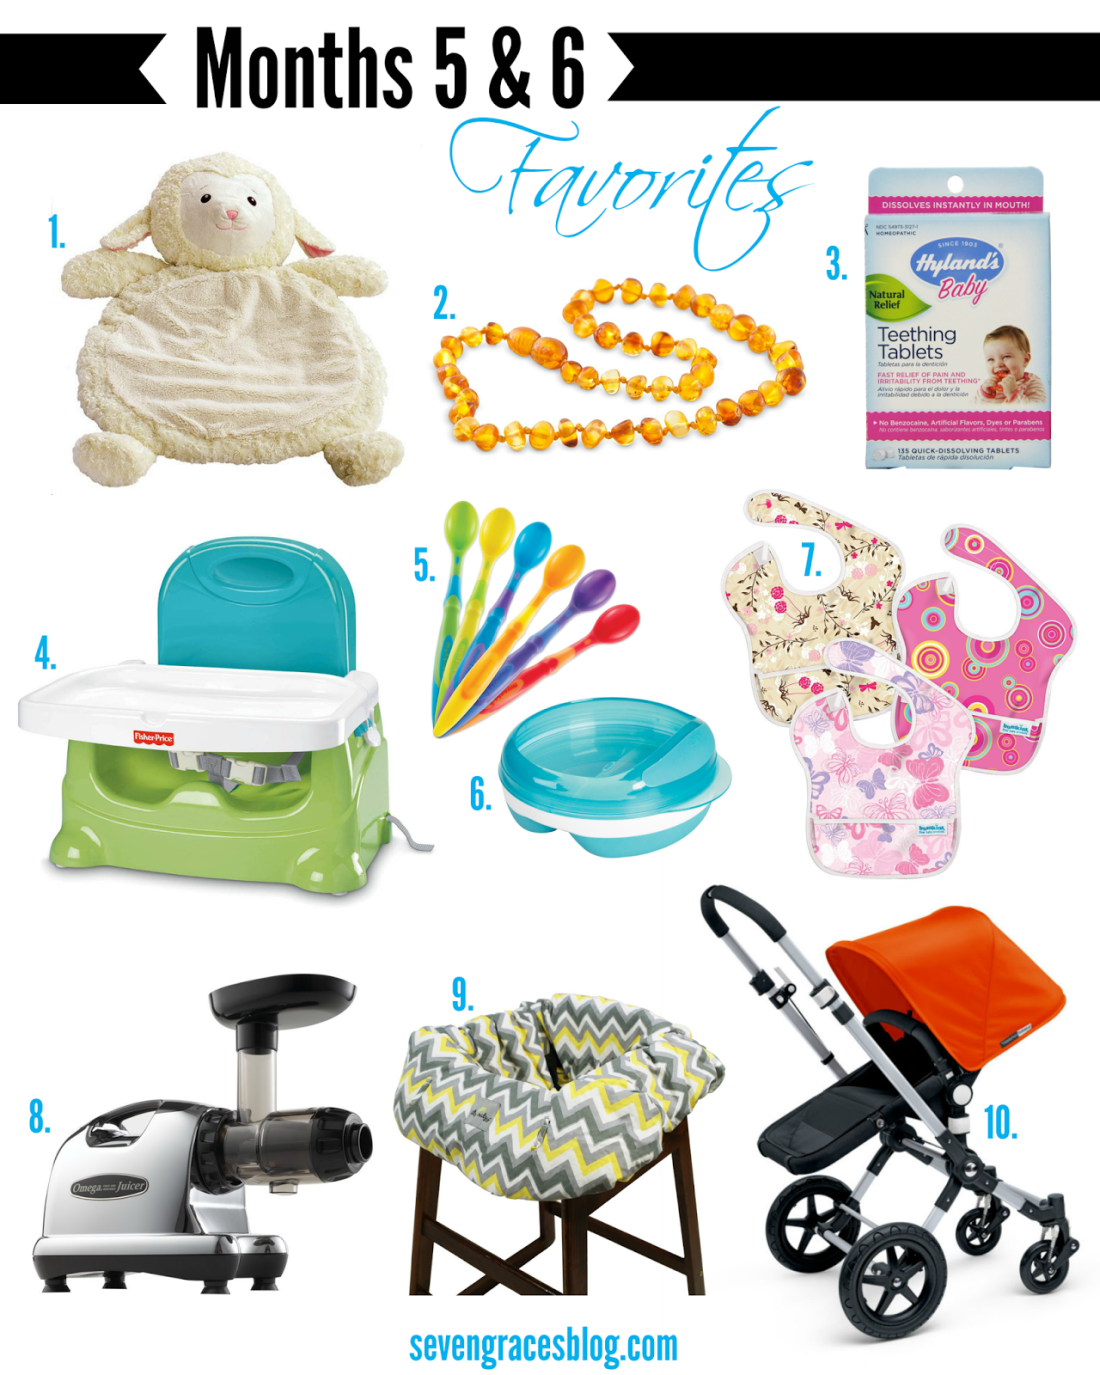 Top 10 Baby Items for Months 5 & 6 Teething & Feeding Seven Graces